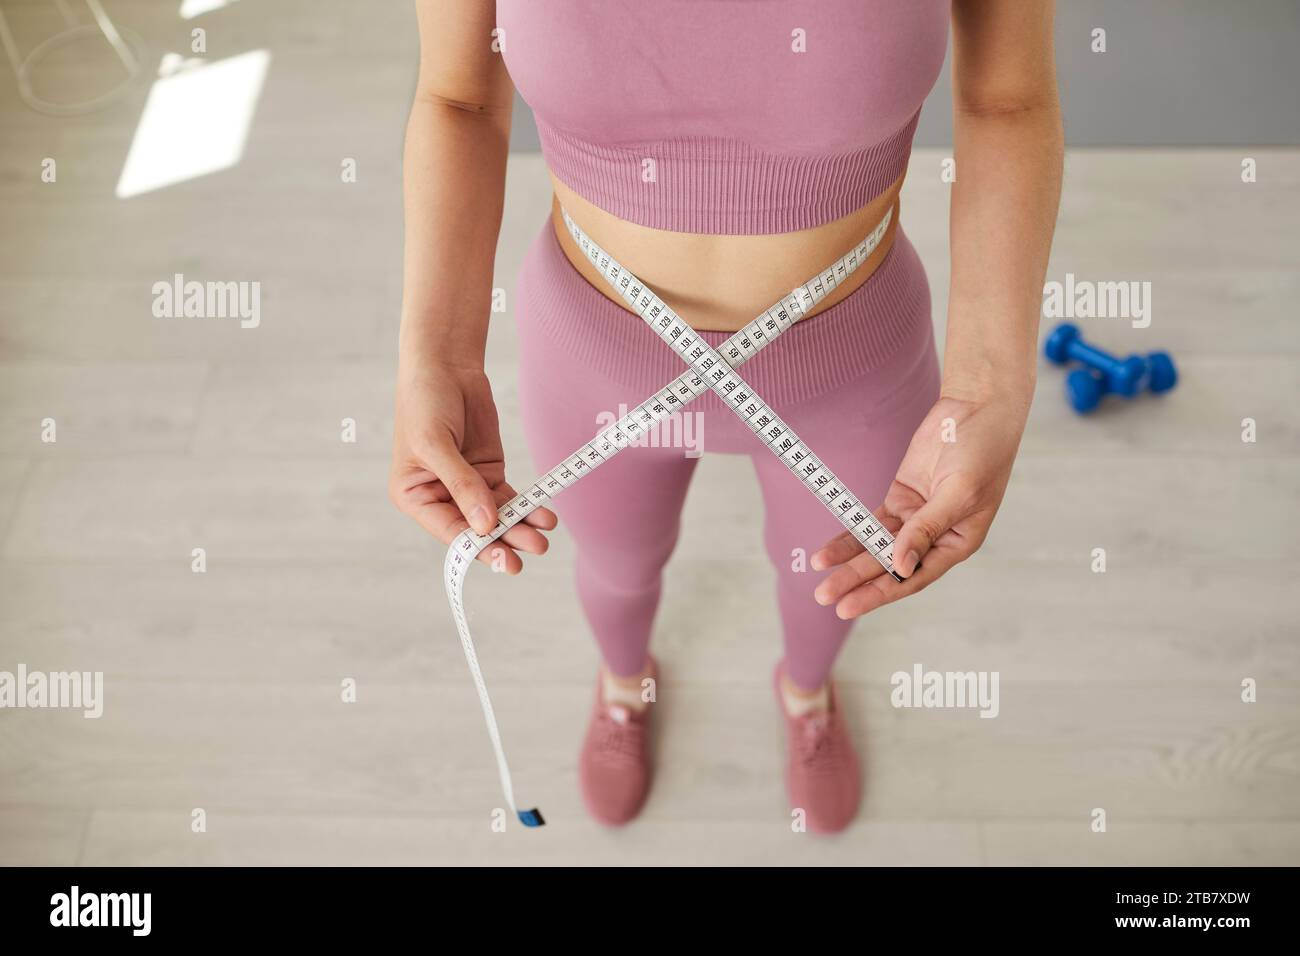 Slim young woman with athletic body is measuring her figure with tape measure. Stock Photo